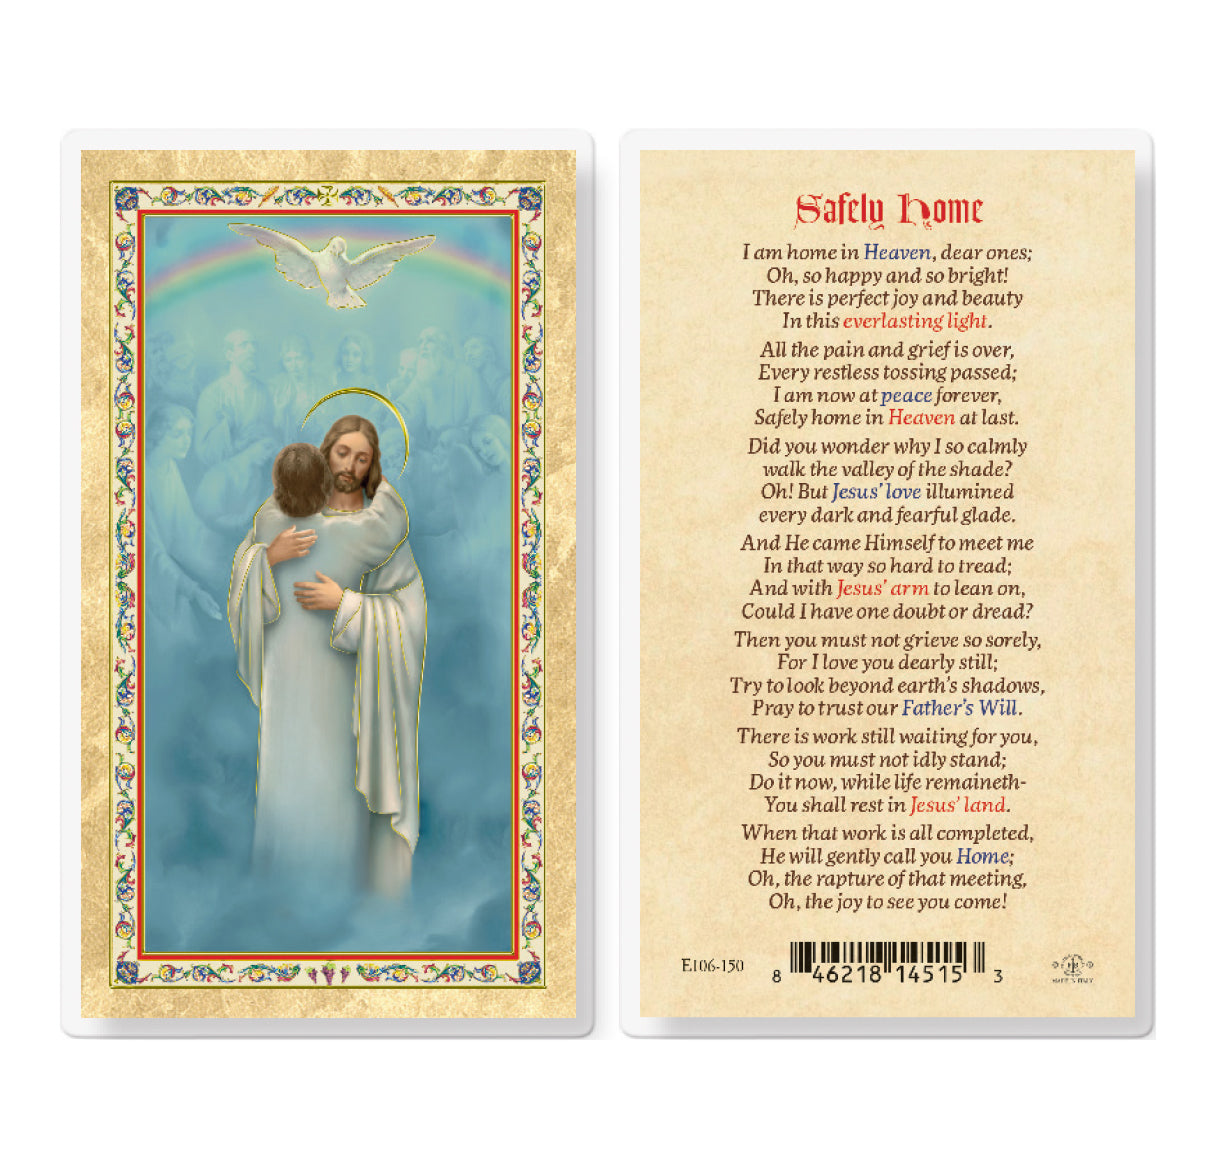 Safely Home Gold-Stamped Laminated Catholic Prayer Holy Card with Prayer on Back, Pack of 25